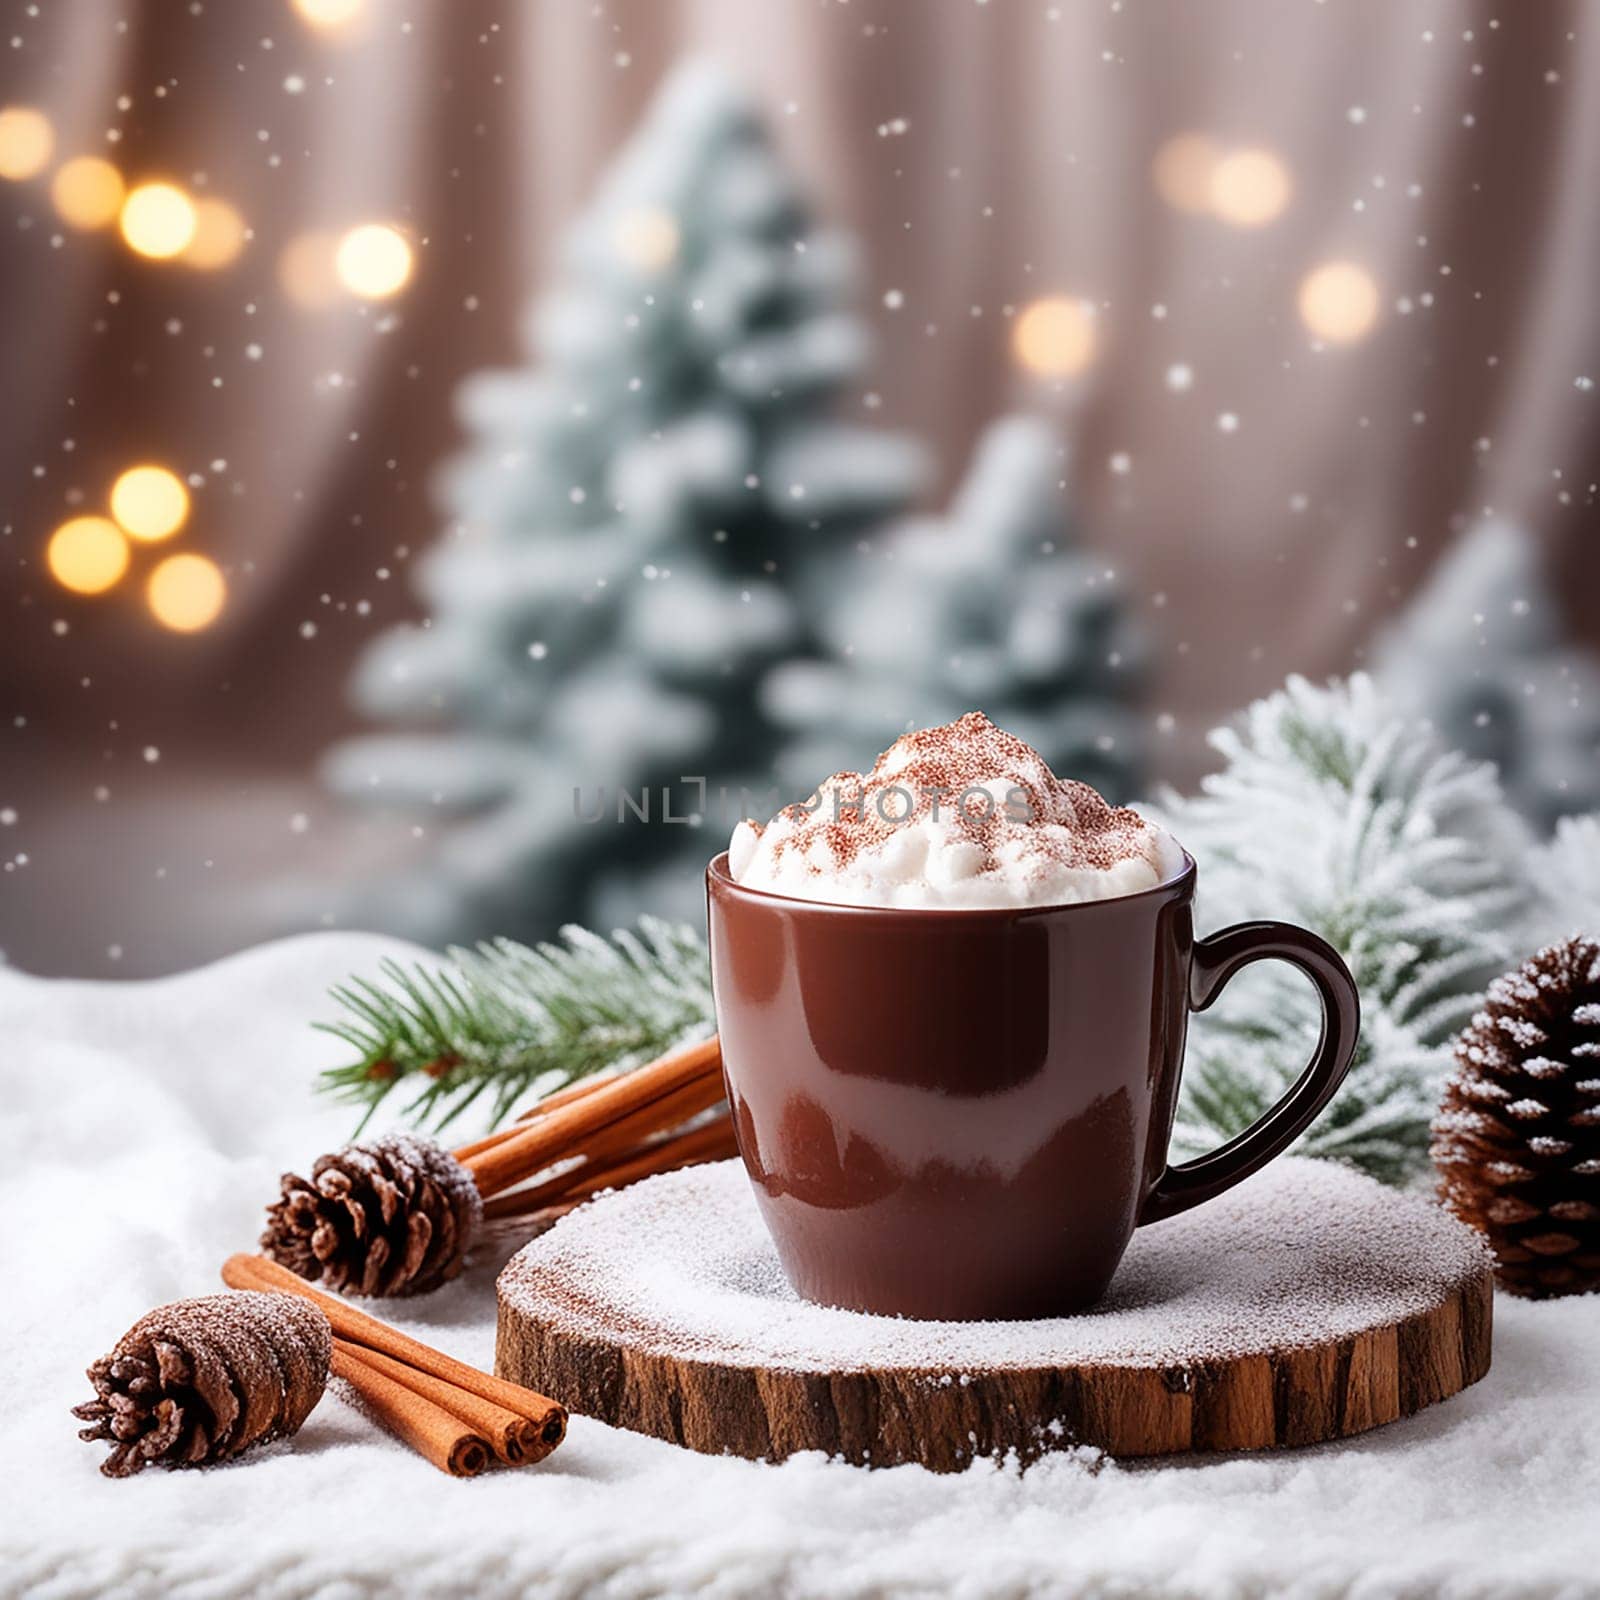 Cup of Hot Cocoa on Knitted Background with Fir Tree and Snow Effect